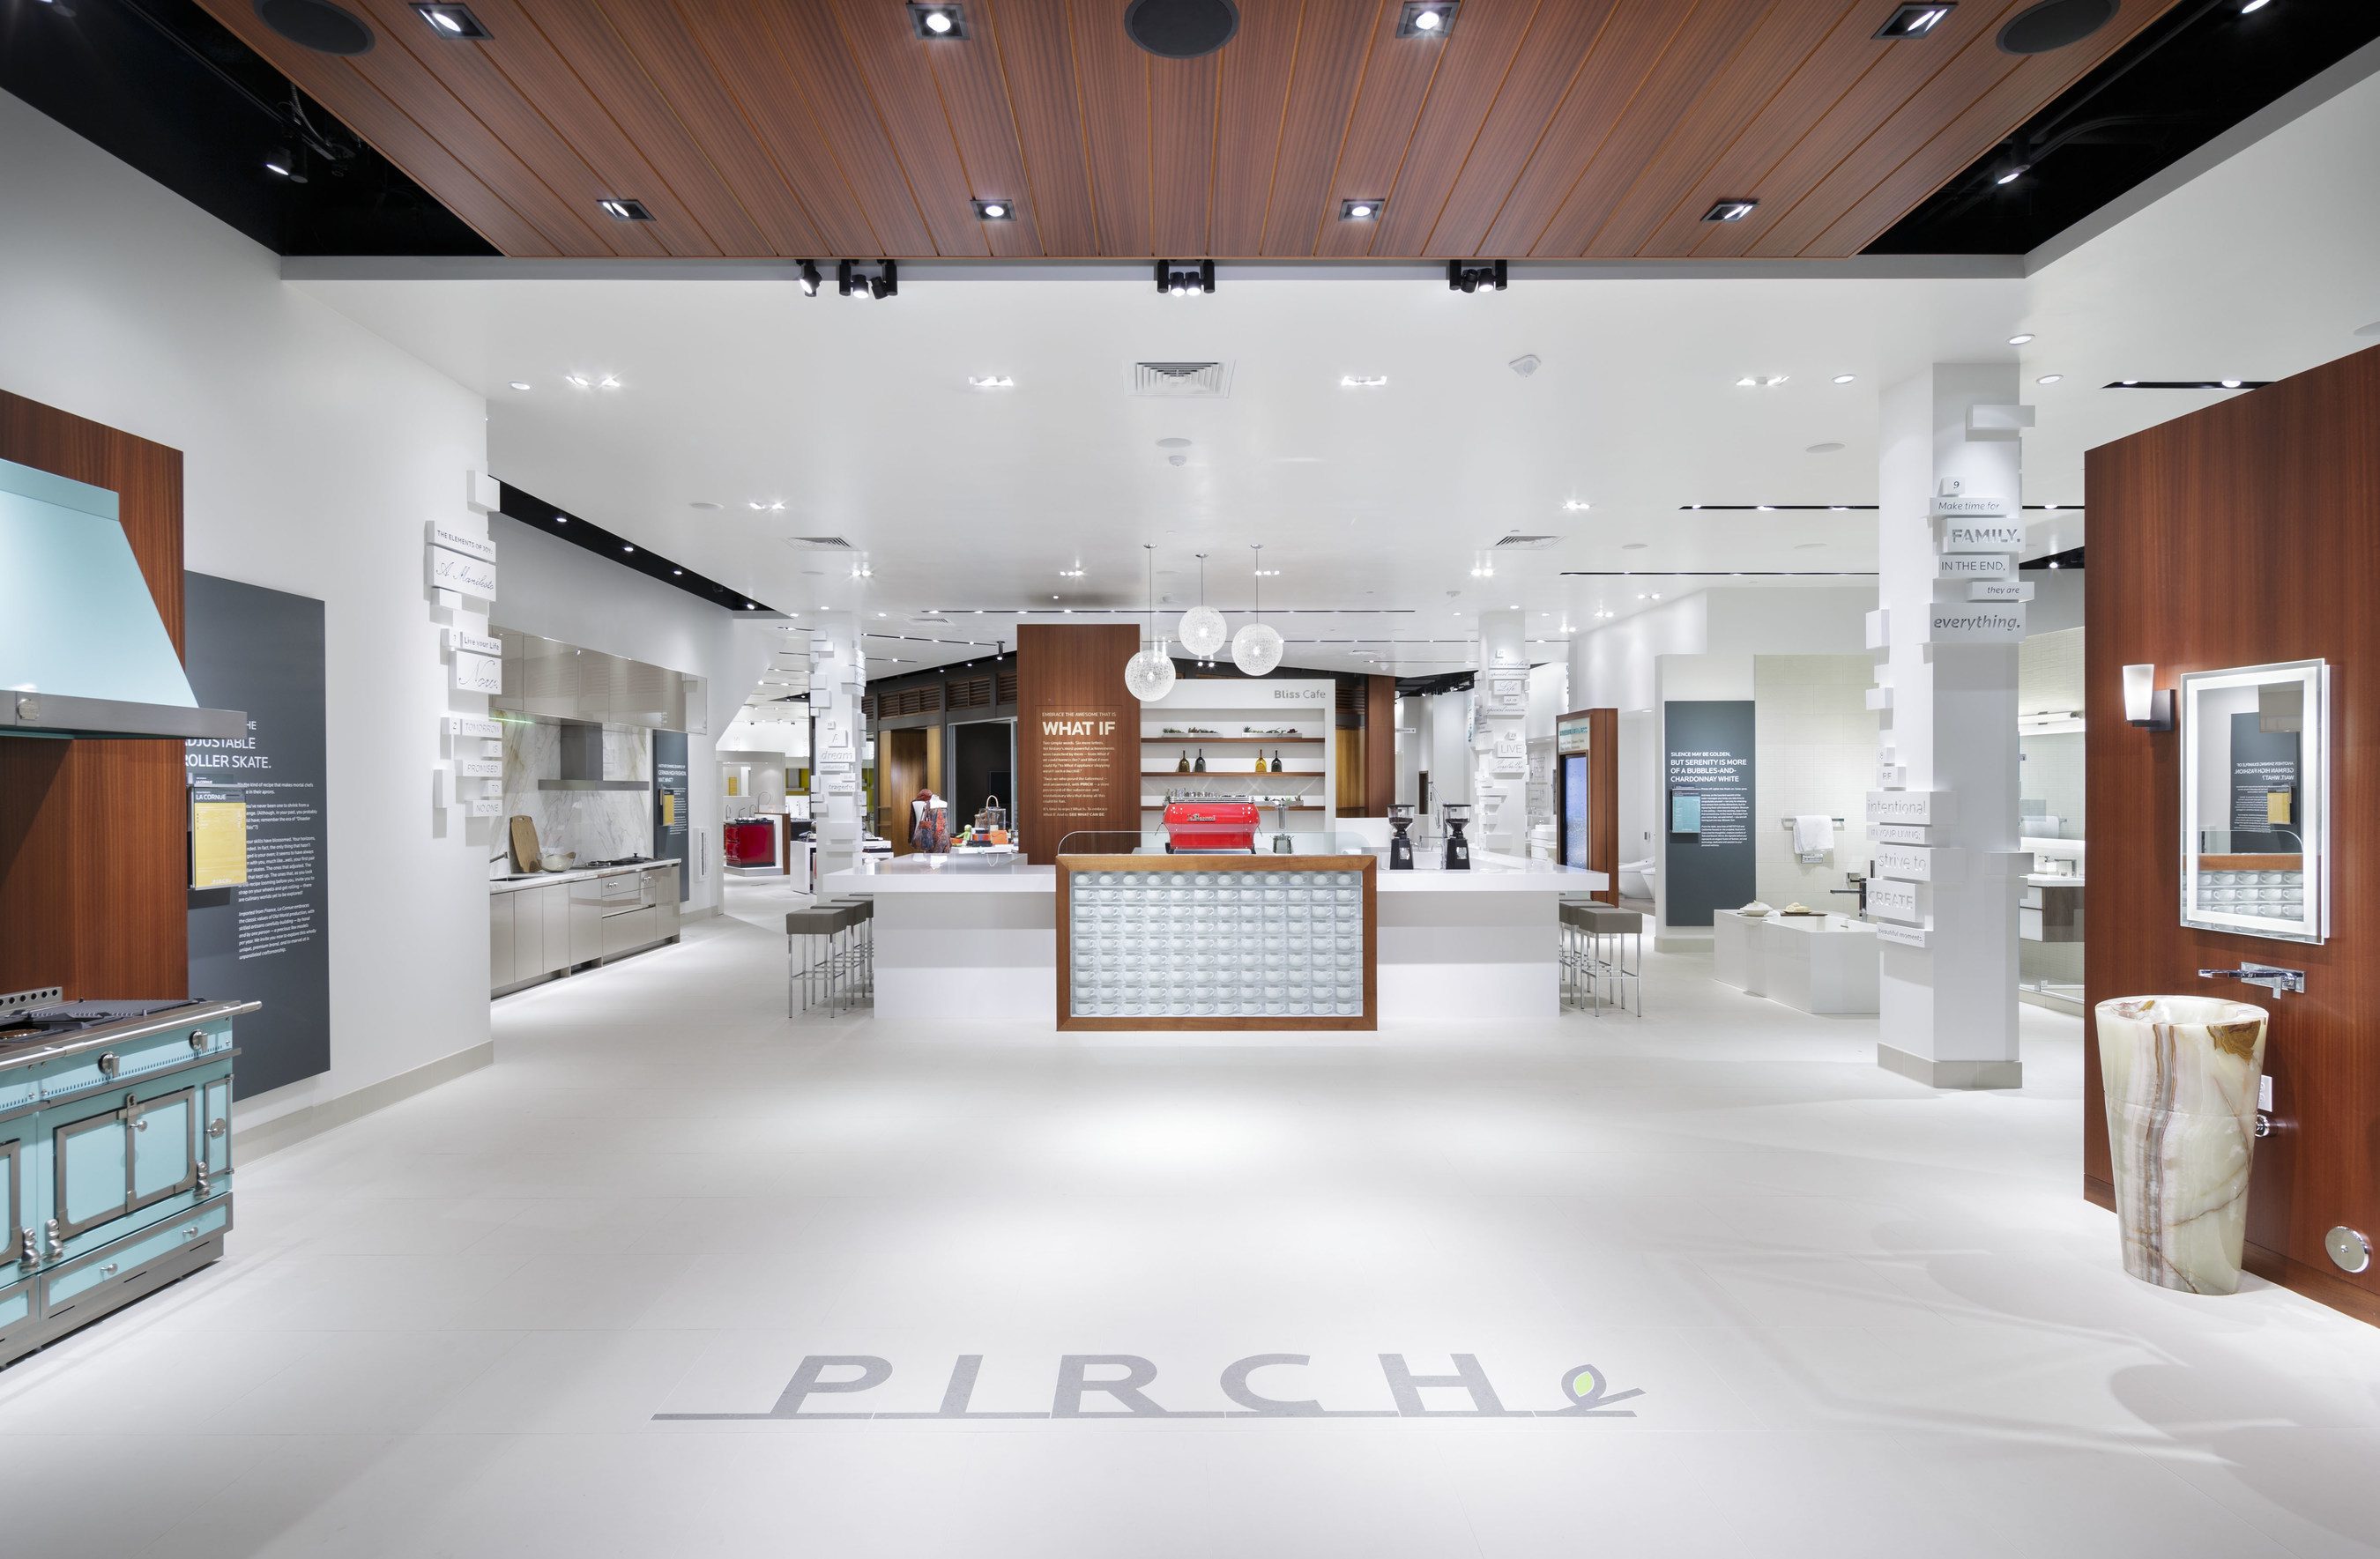 Pirch To Open Its Award Winning Concept At Garden State Plaza In